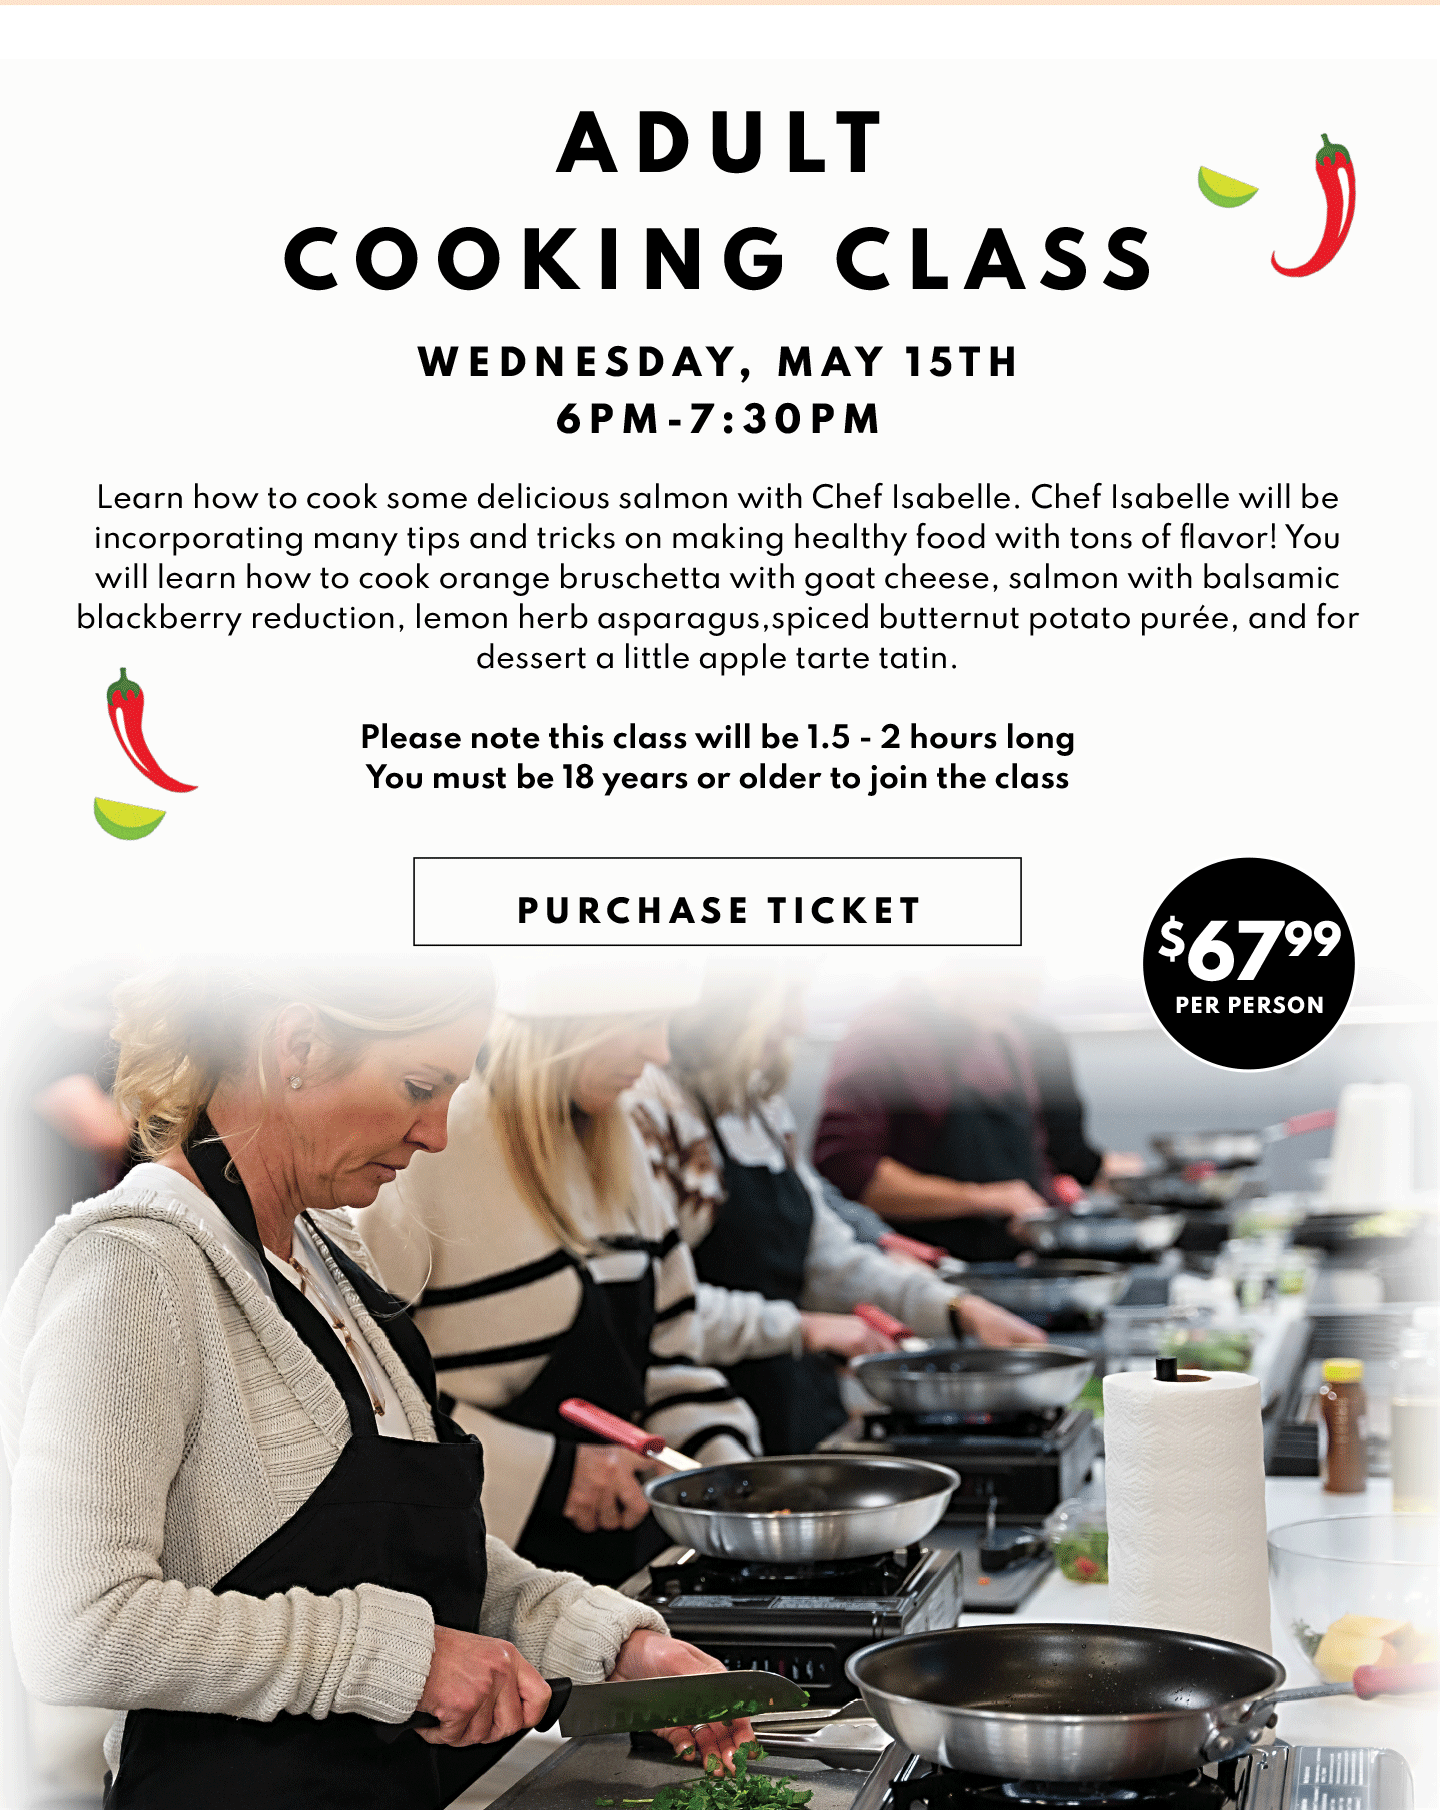 Adult Cooking Class WEd May 15tth, 6pm-7:30 pm, $67.99 per person